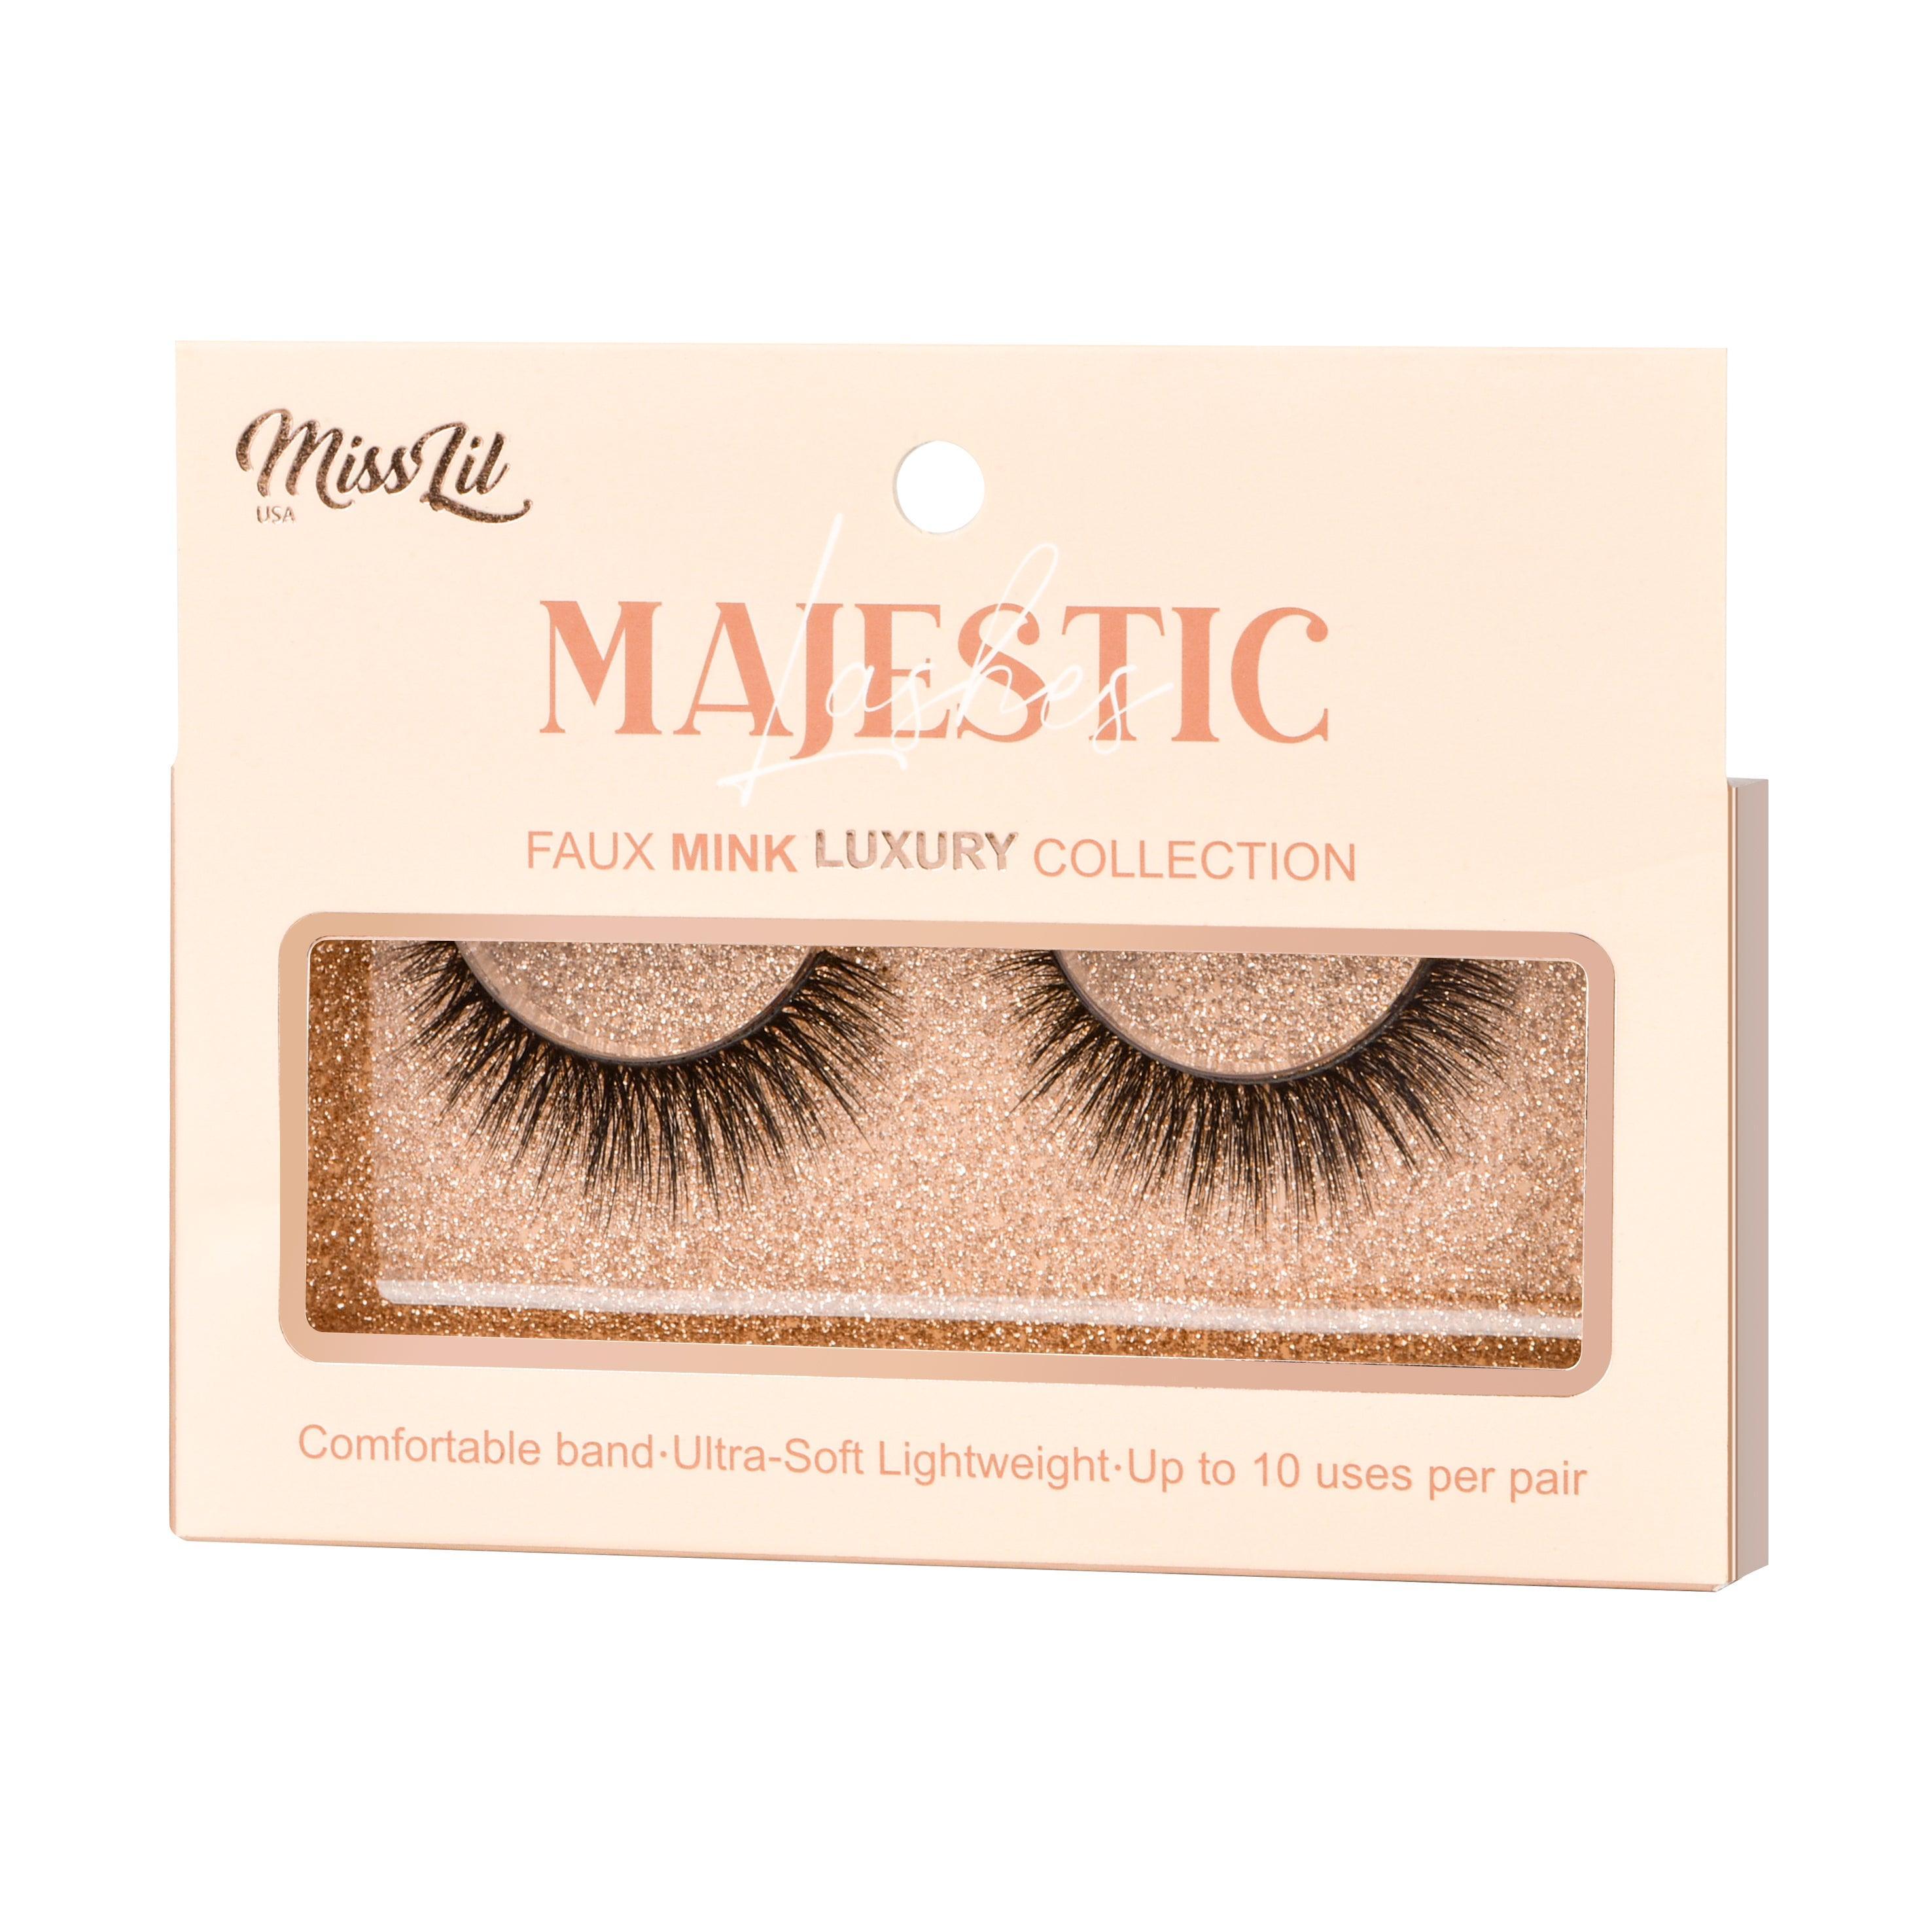 Majestic Collection 16 fake lashes - Miss Lil USA Wholesale